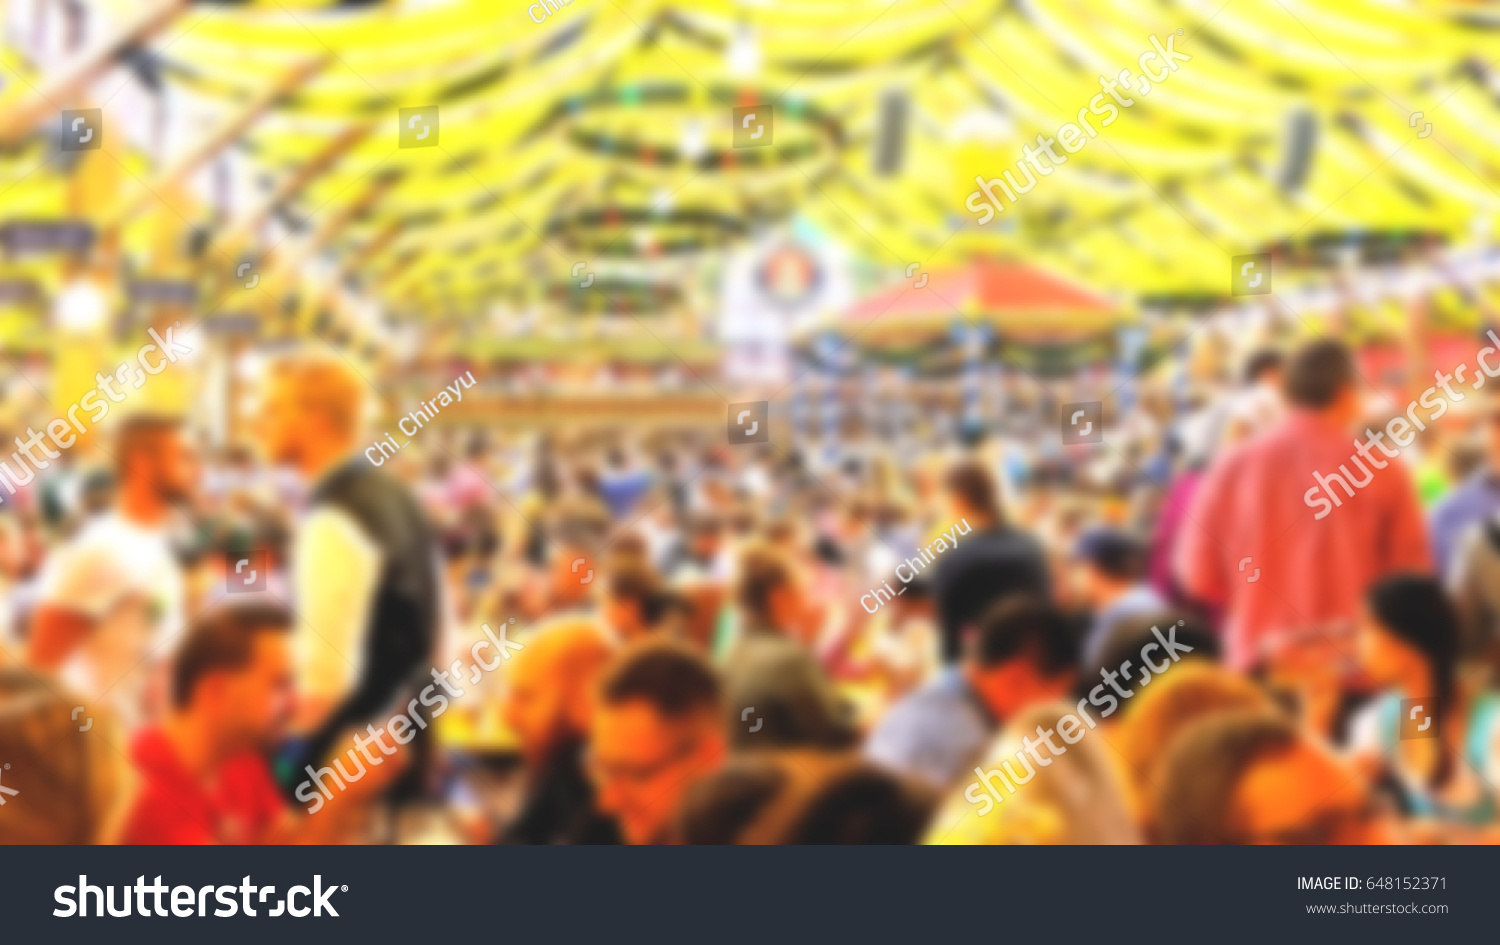 Blur_People enjoy live music and drinking beer during October festival in munich (München), Germany #648152371